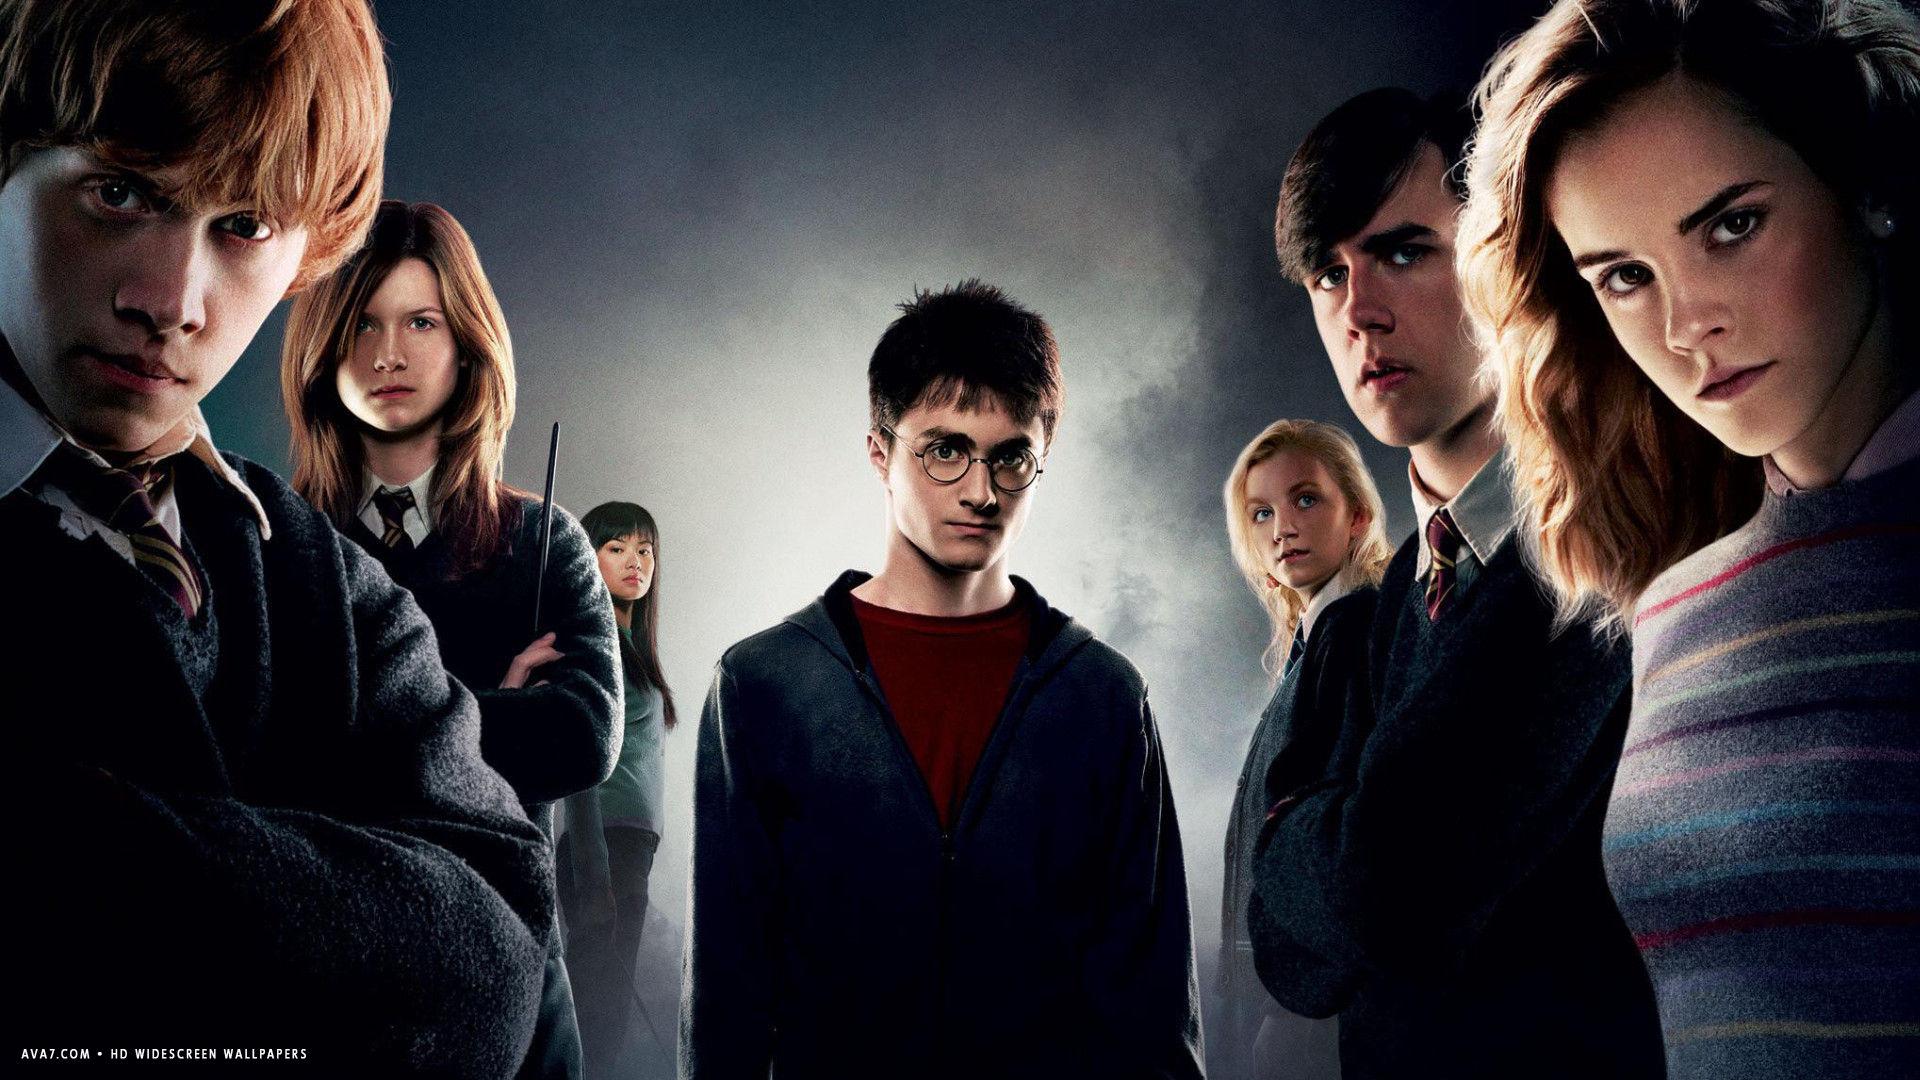 harry potter order of the phoenix full movie online free